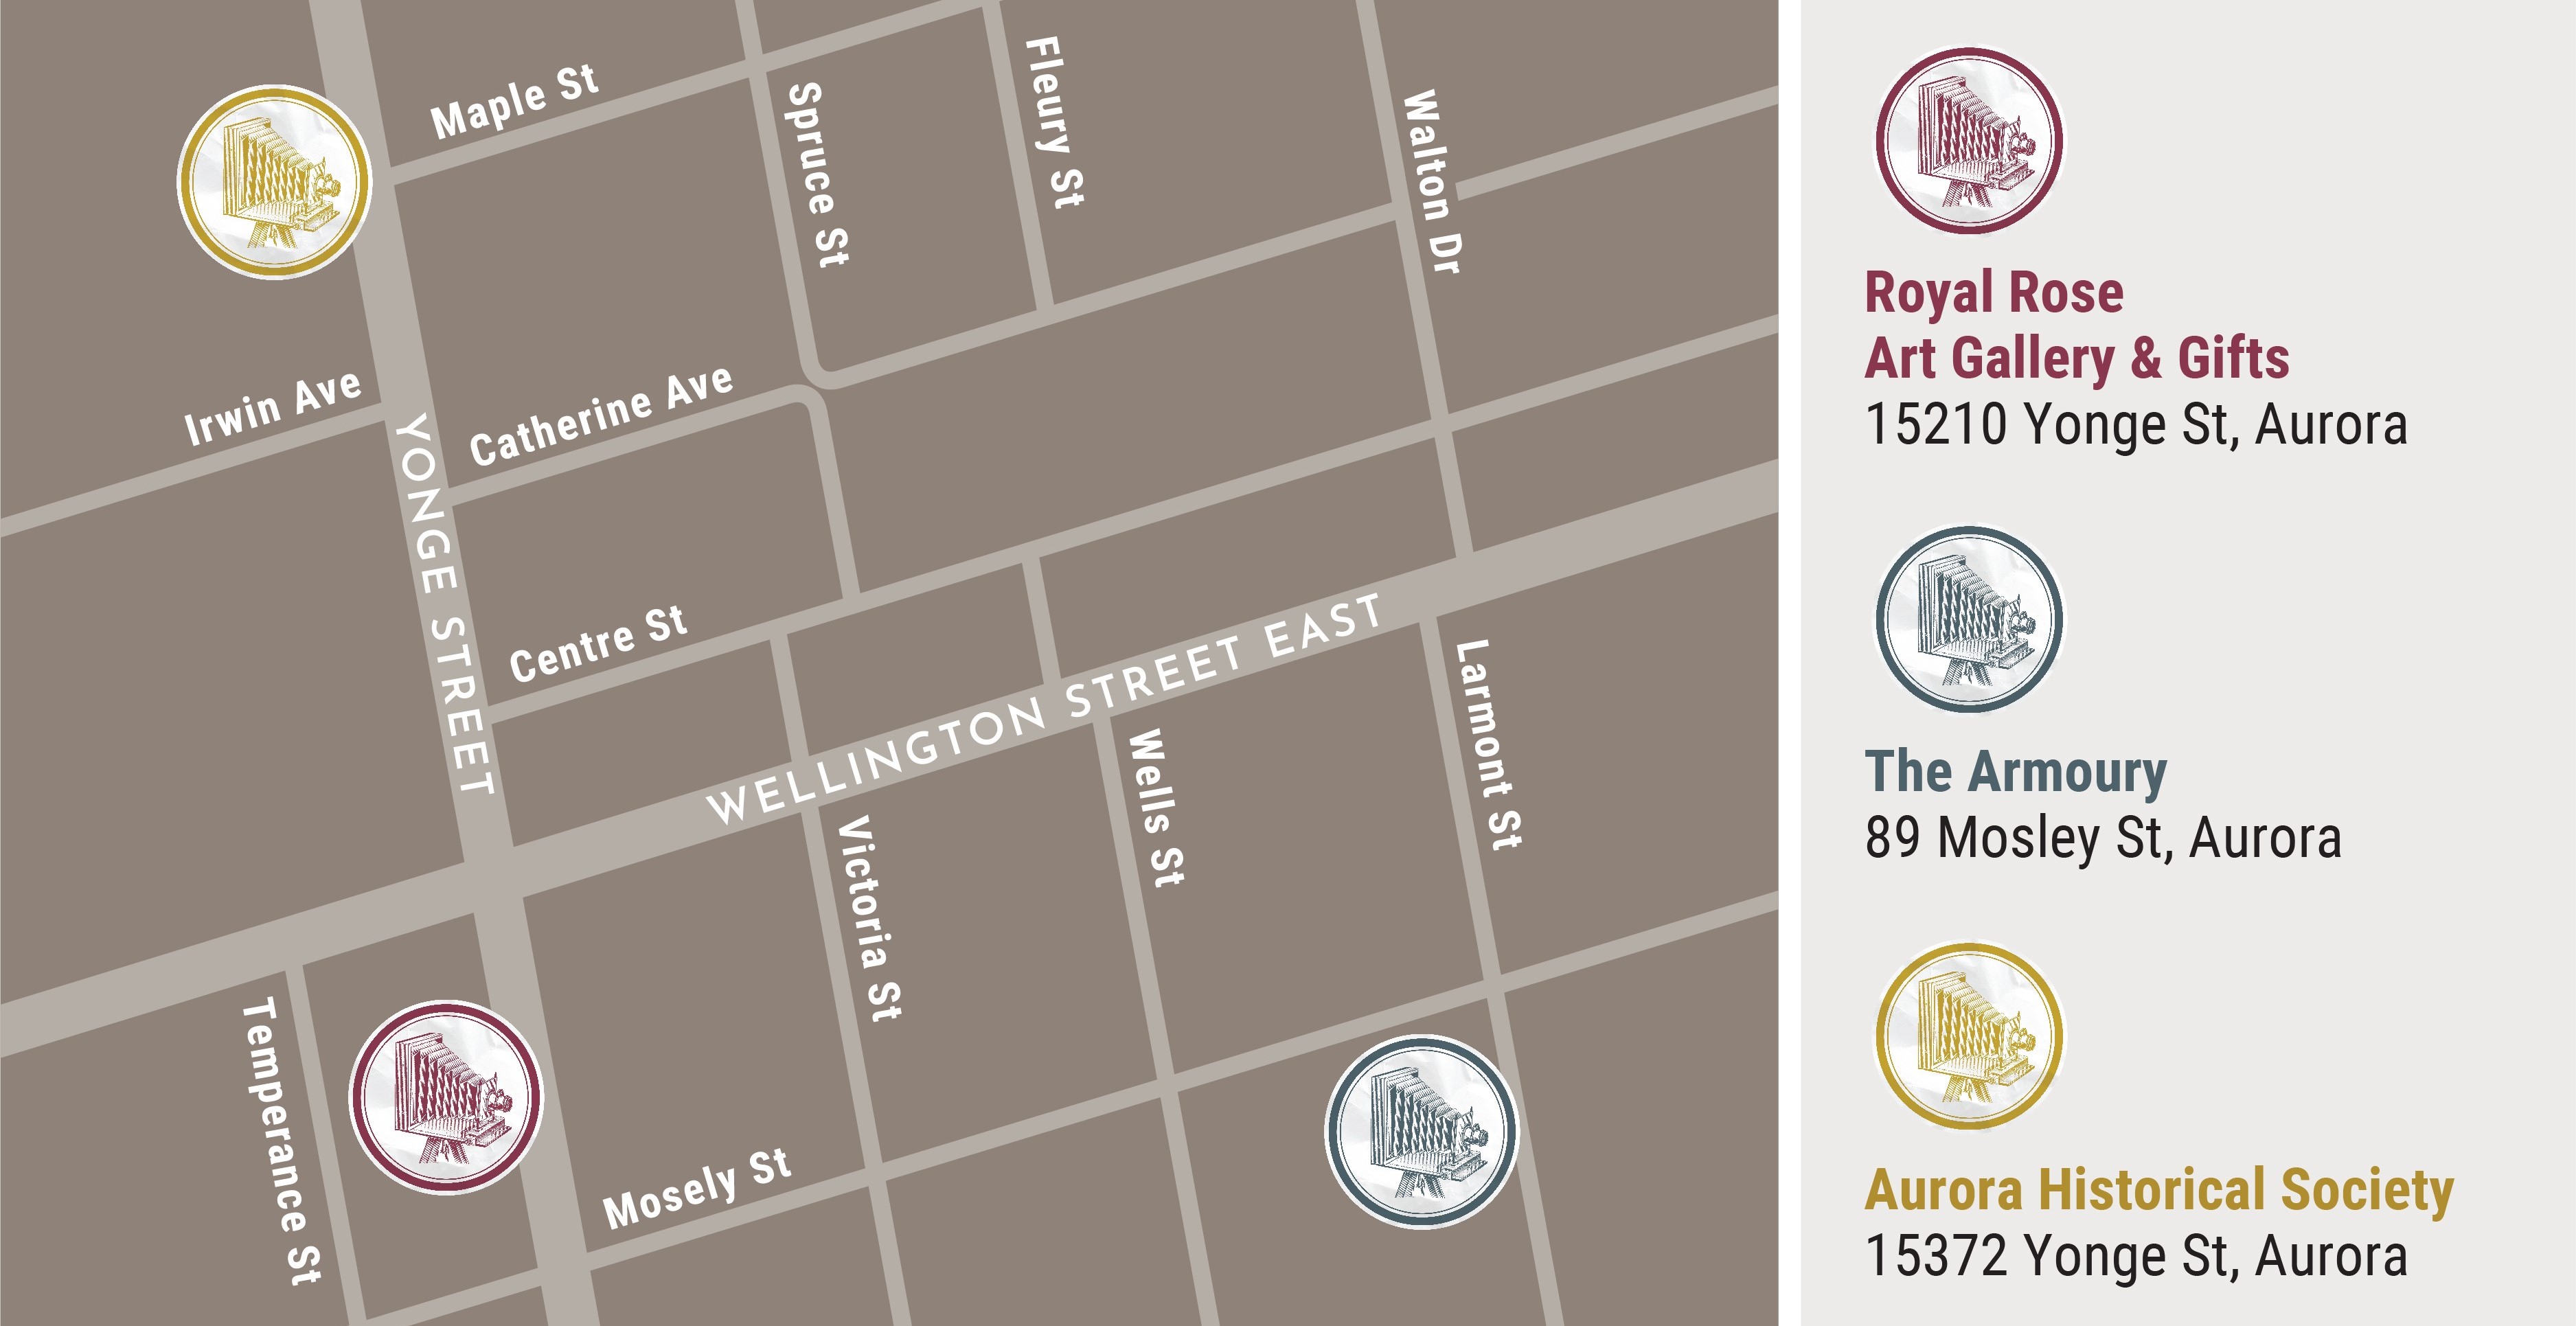 Aurora street map showing Royal Rose Art Gallery and Gifts, The Armoury and Aurora Historical Society locations